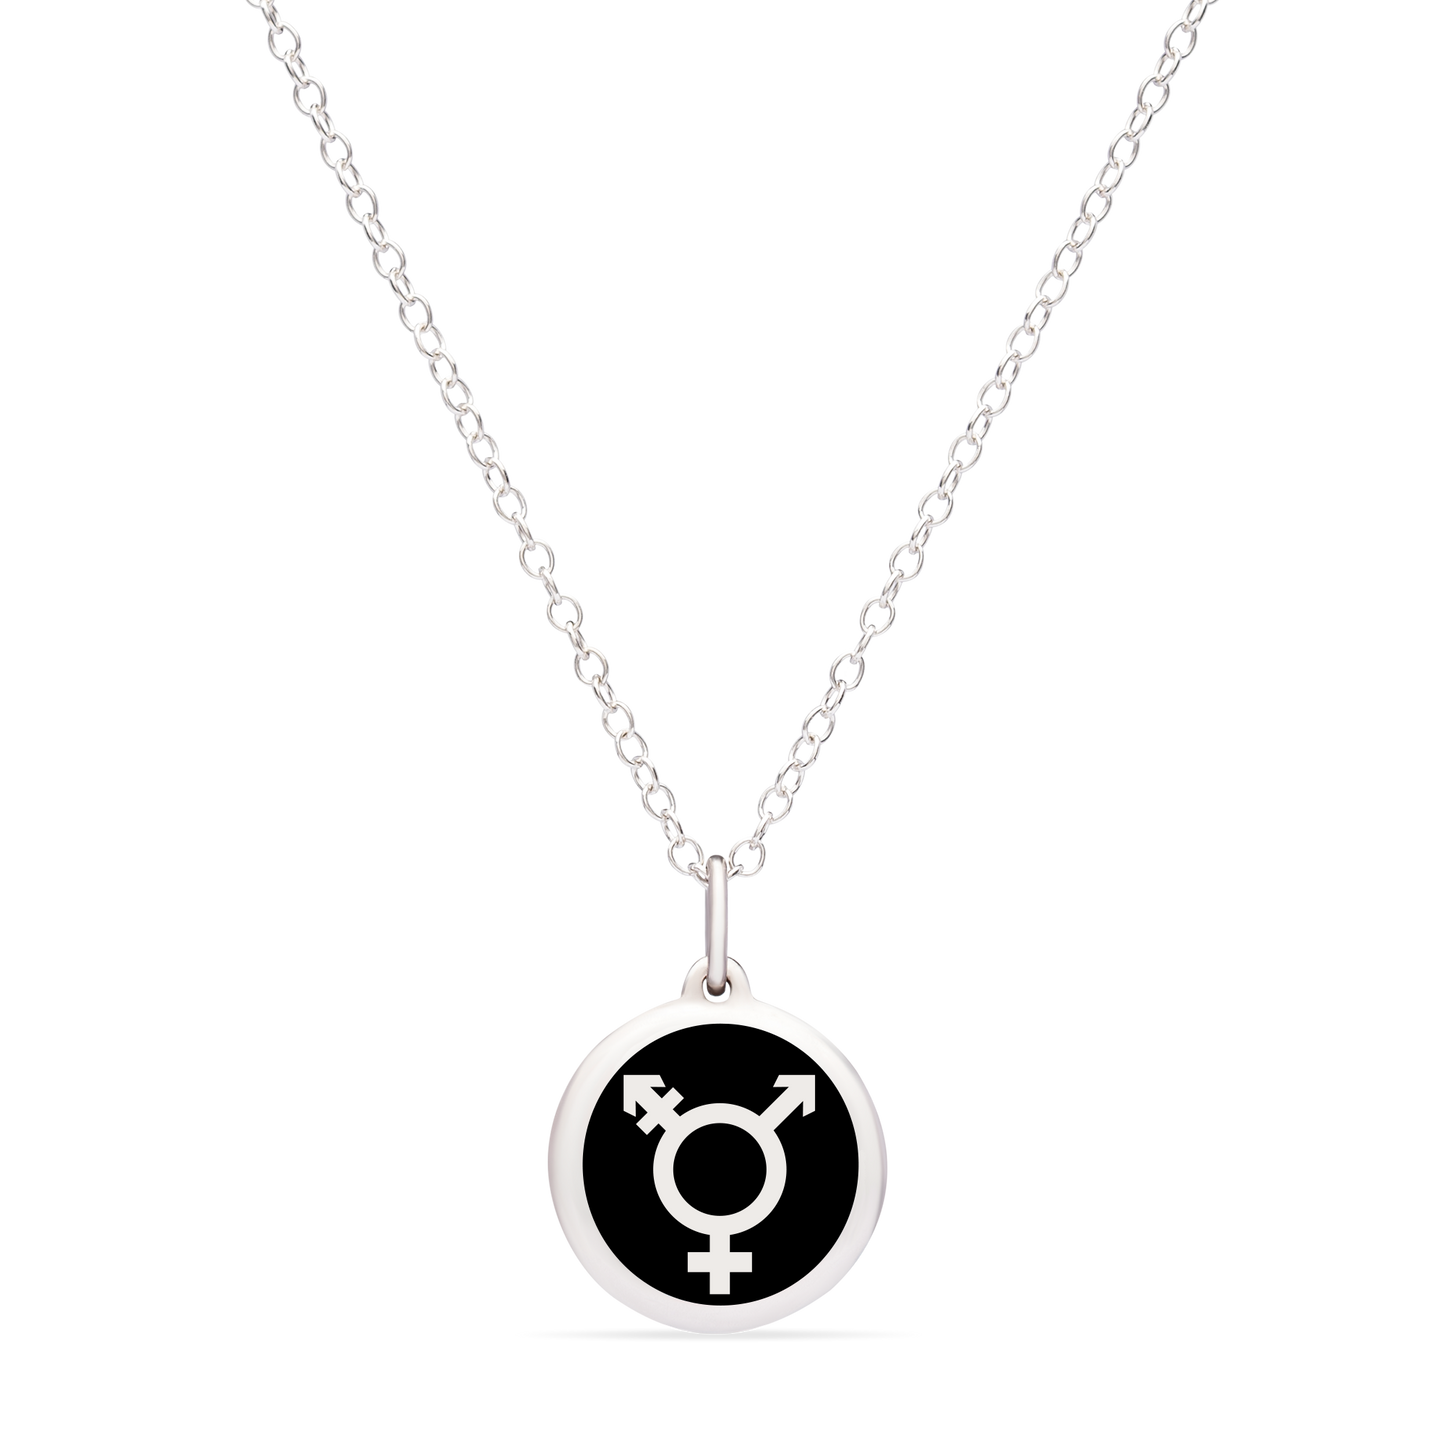 ALL-INCLUSIVE GENDER SYMBOL in sterling silver with rhodium plate